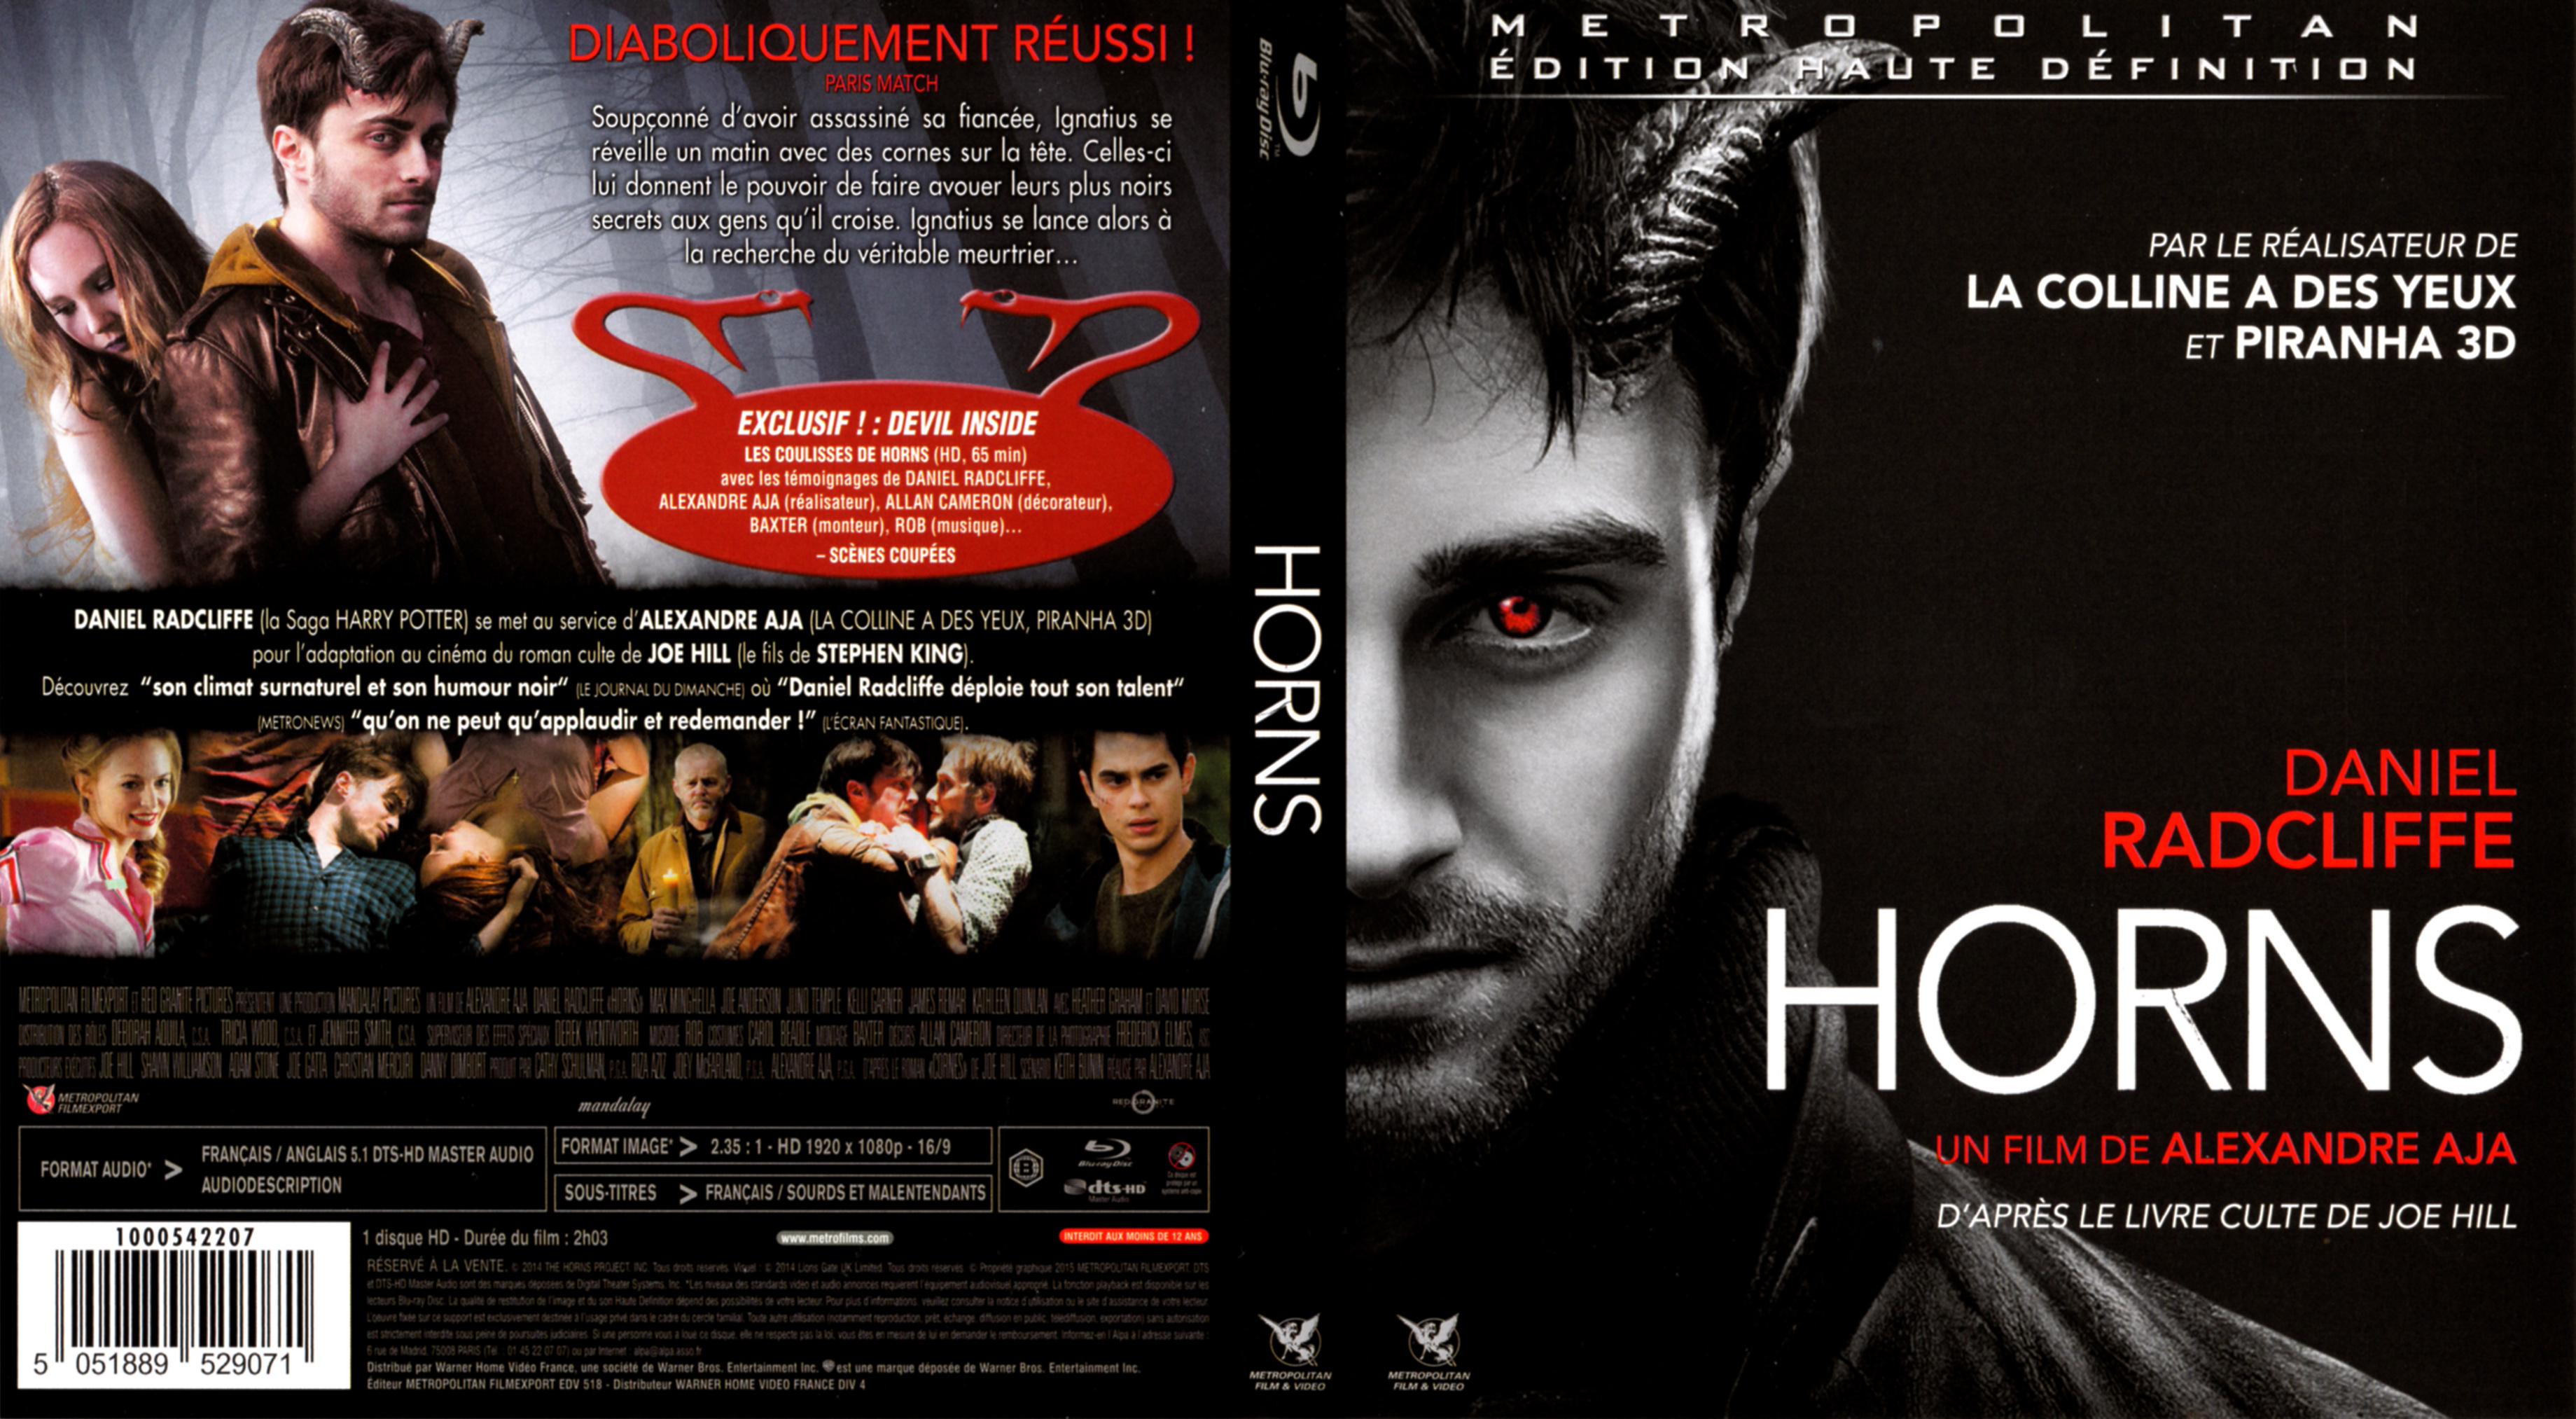 Jaquette DVD Horns (BLU-RAY)